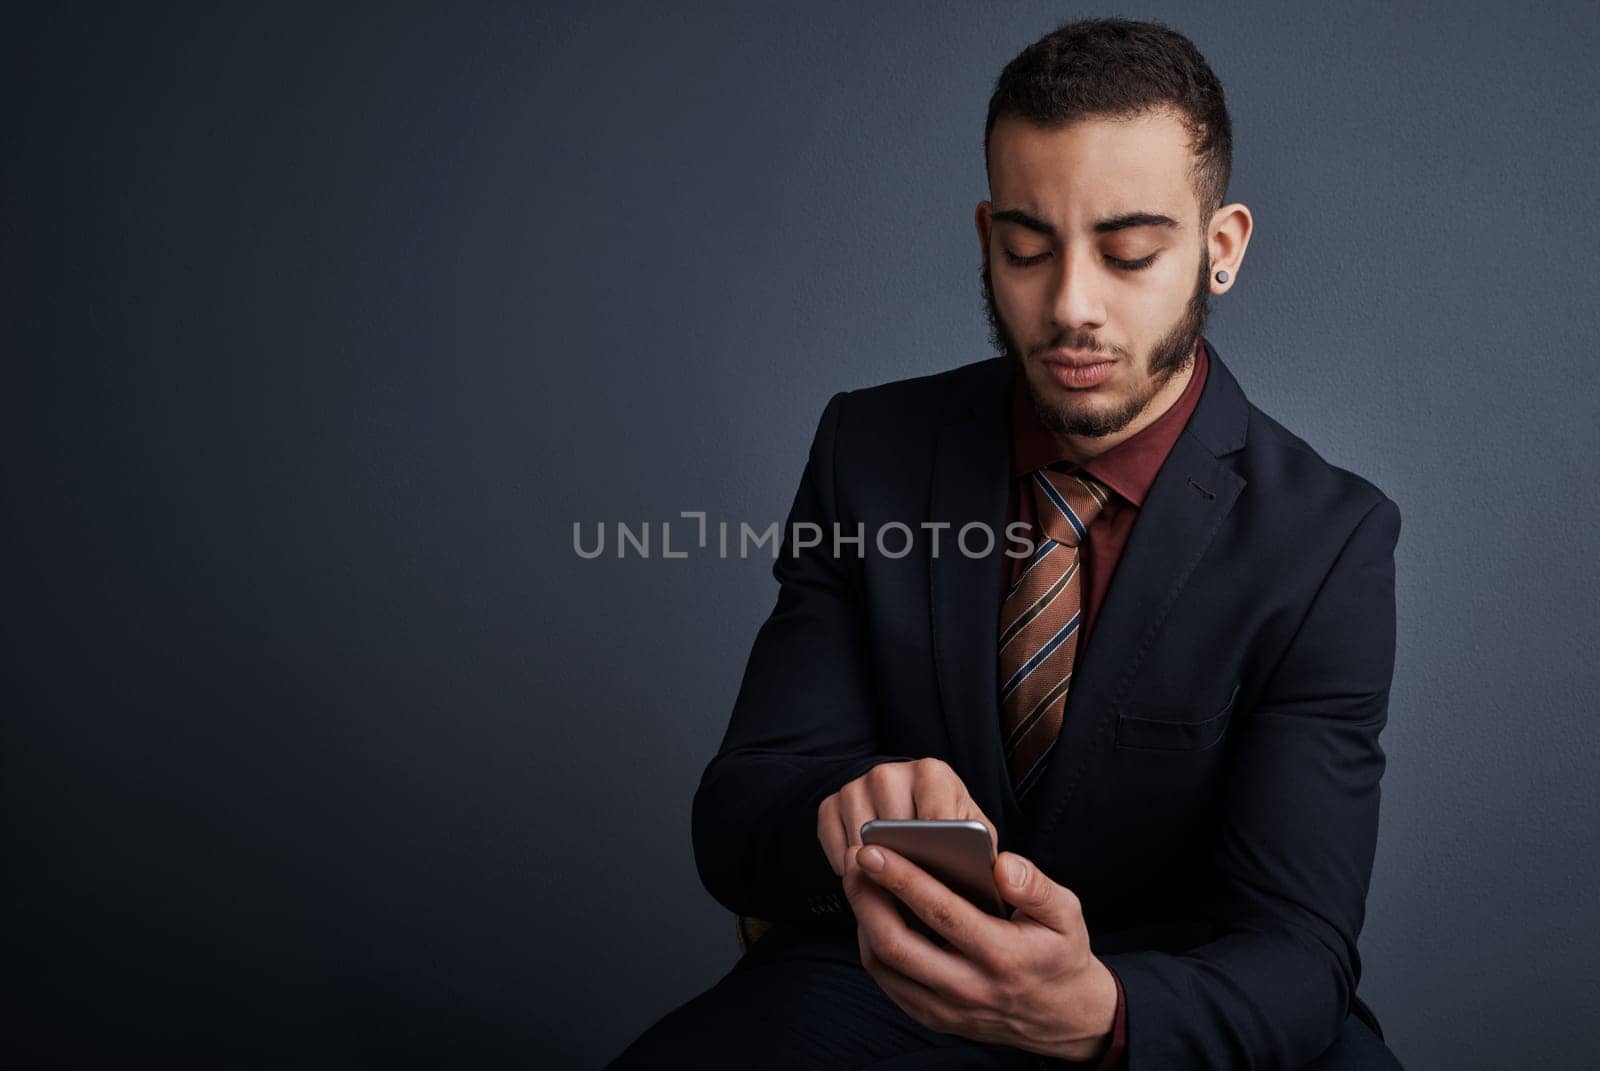 Its communication made simple. Studio shot of a stylish young businessman sending a text message while sitting against a gray background